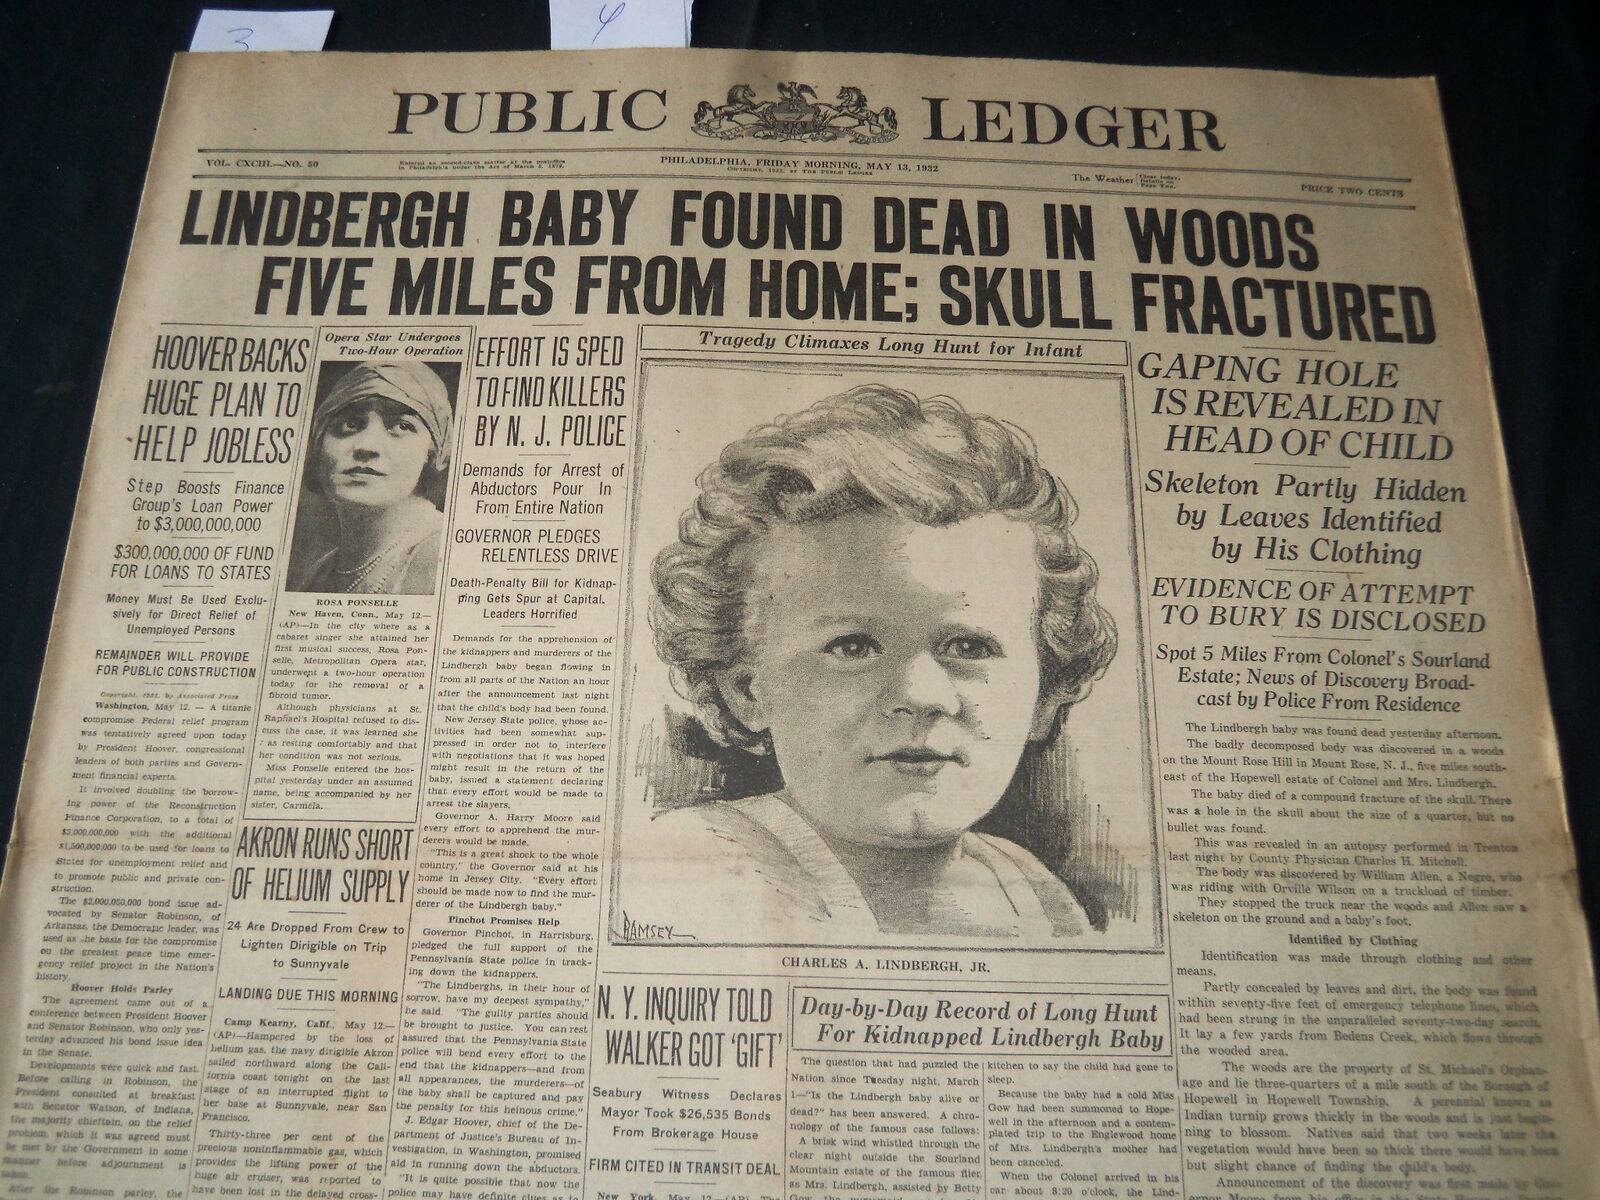 1932 MAY 13 PUBLIC LEDGER NEWSPAPER -LINDBERGH BABY FOUND DEAD IN WOODS- NT 7258